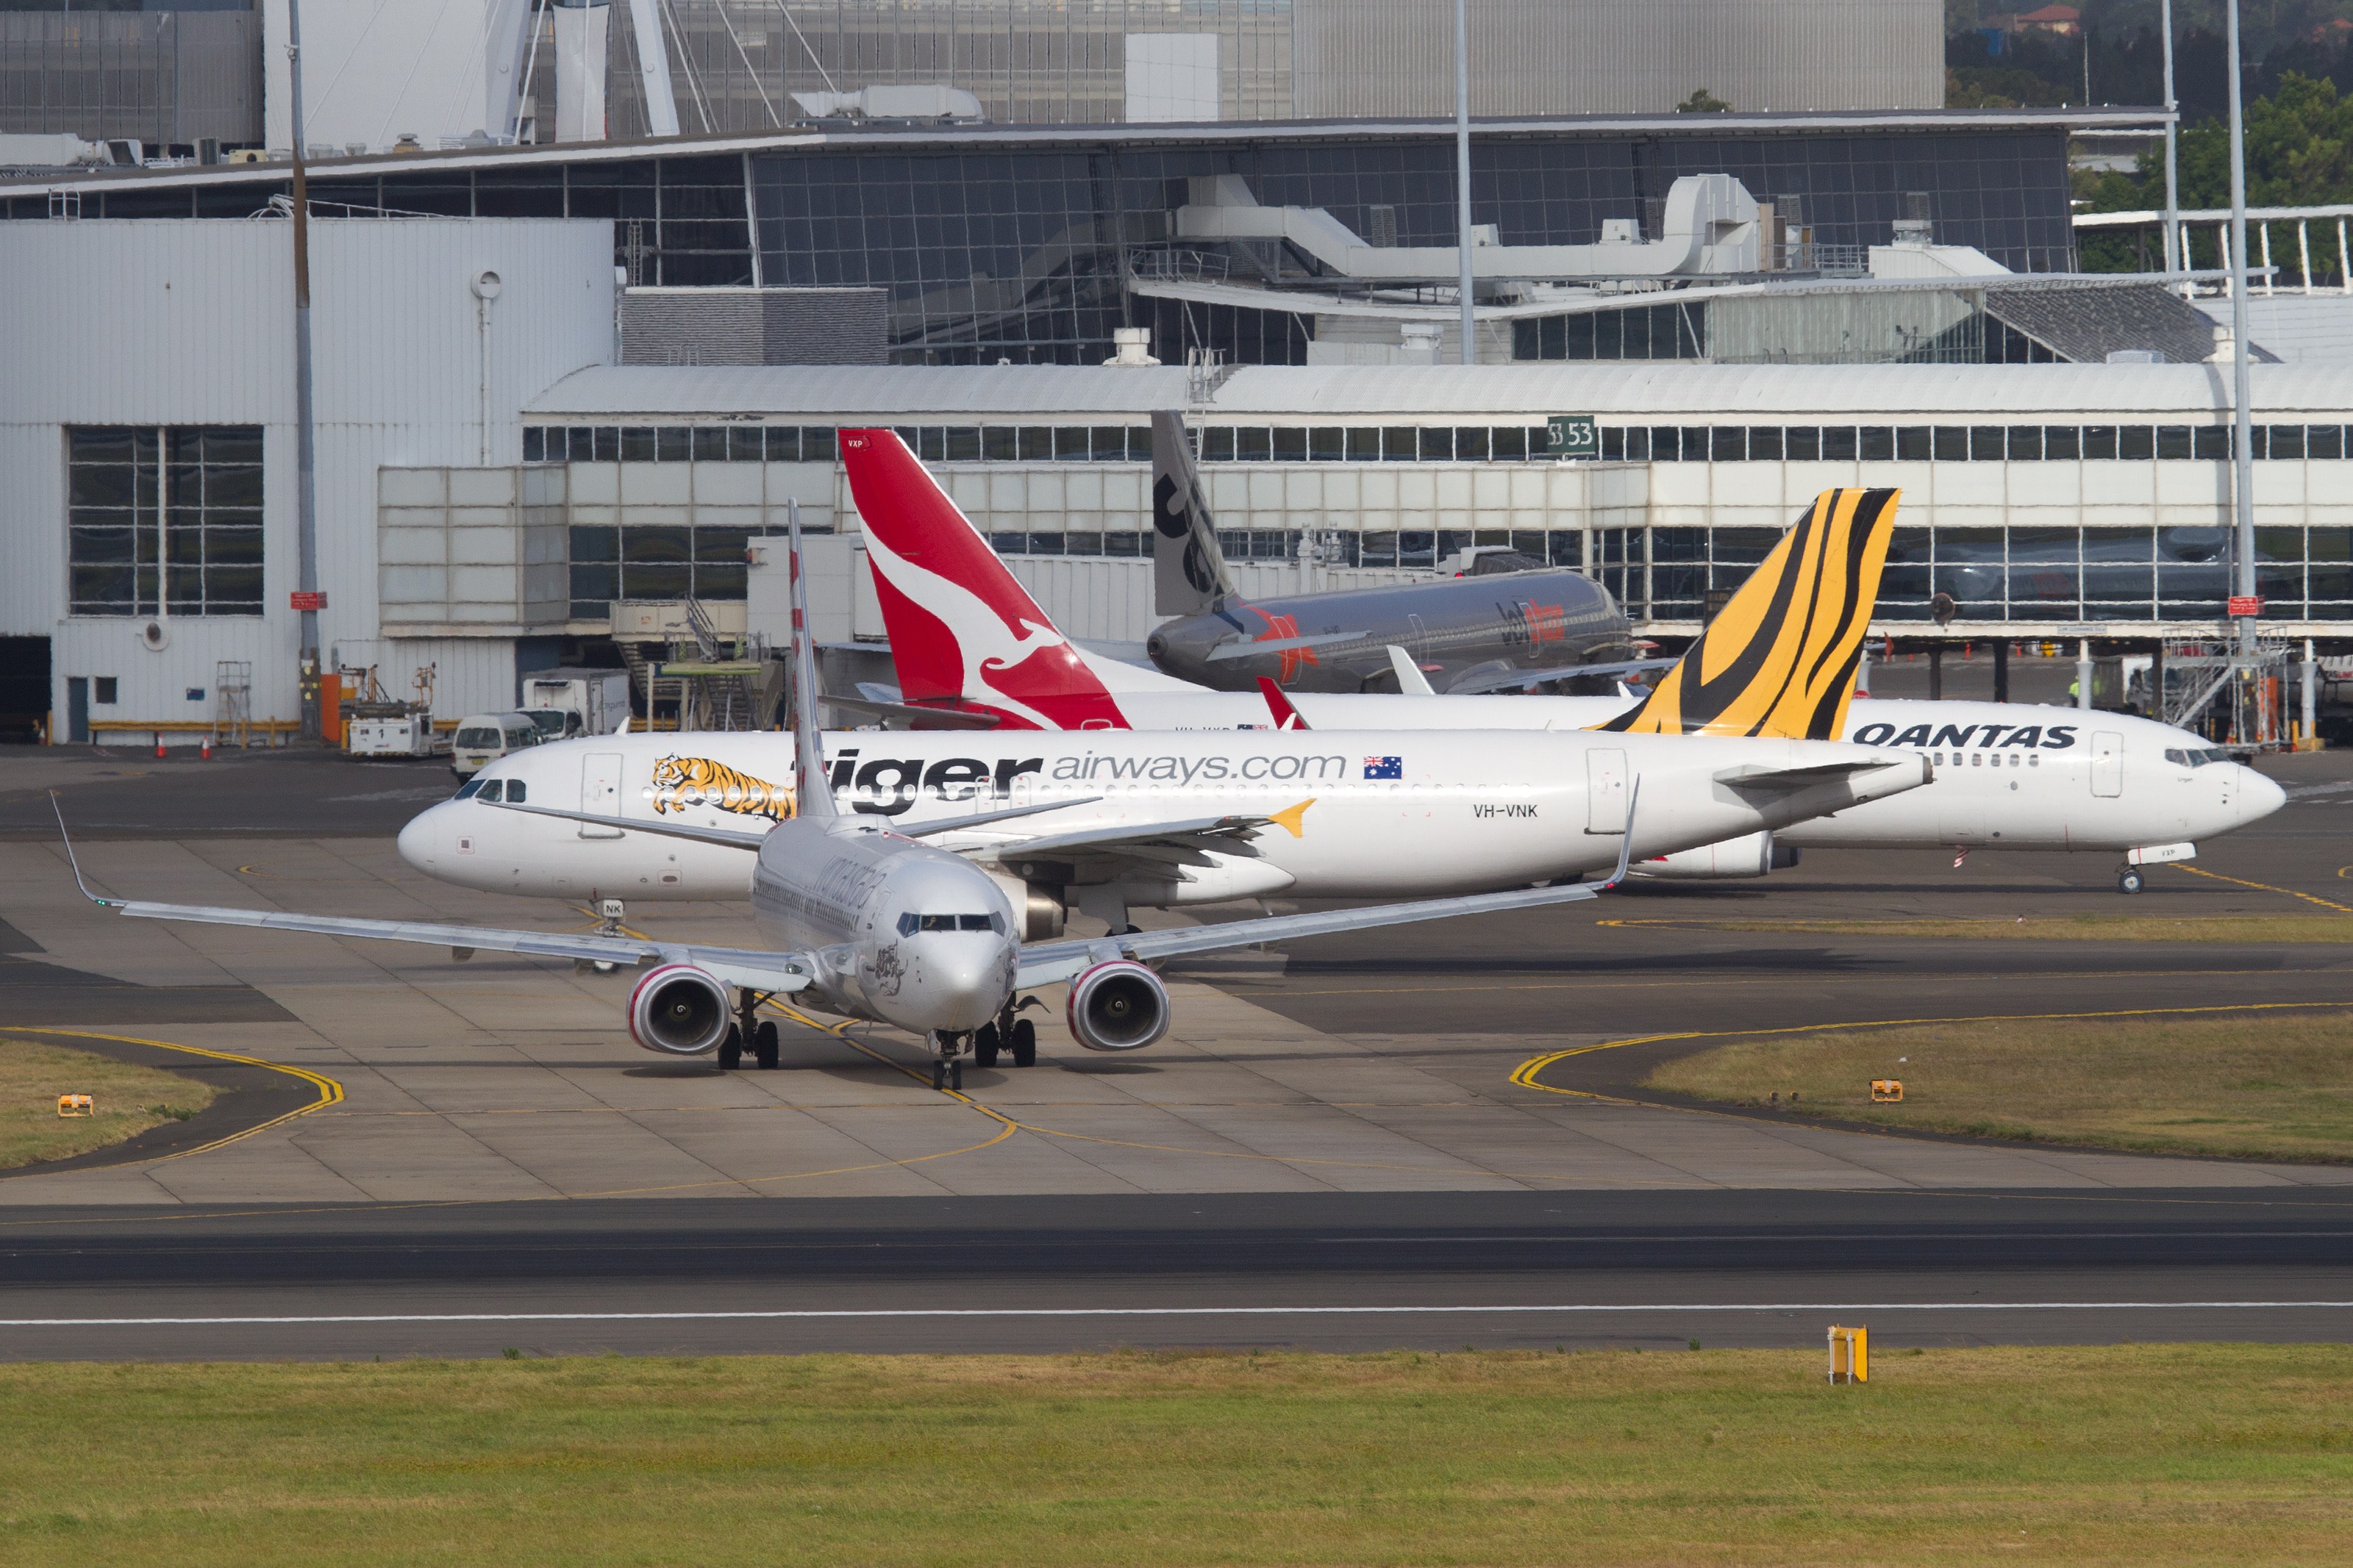 Airlines lobby group urges Productivity Commission to consider evidence